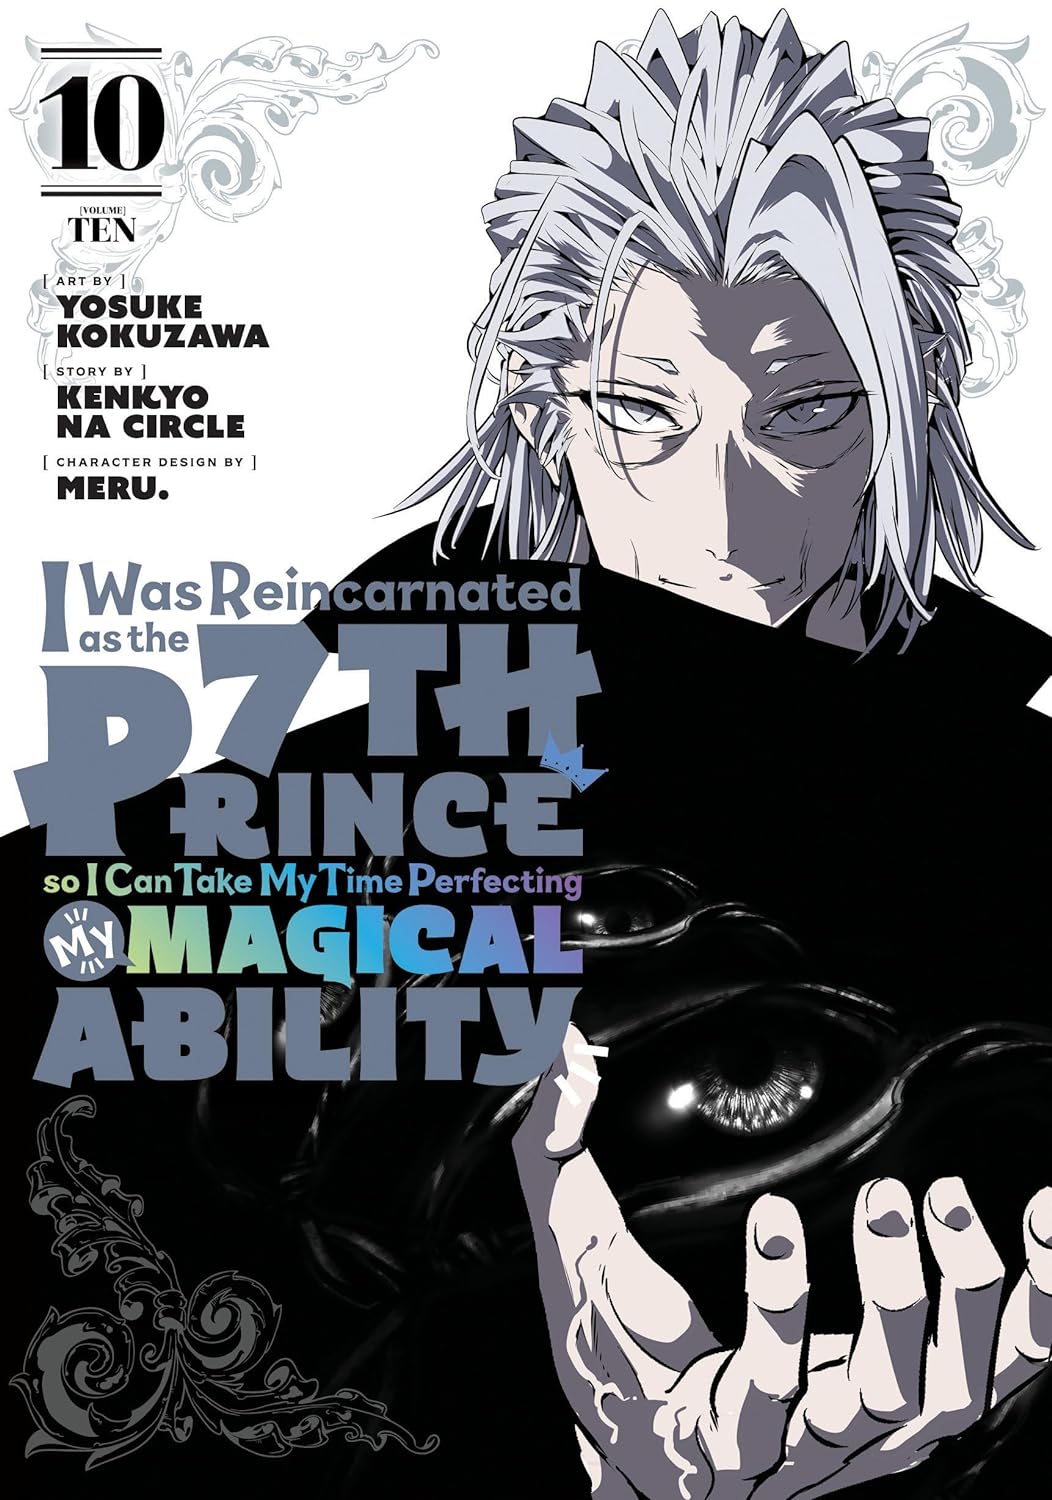 I Was Reincarnated as the 7th Prince so I Can Take My Time Perfecting My Magical Ability (Manga) Vol. 10